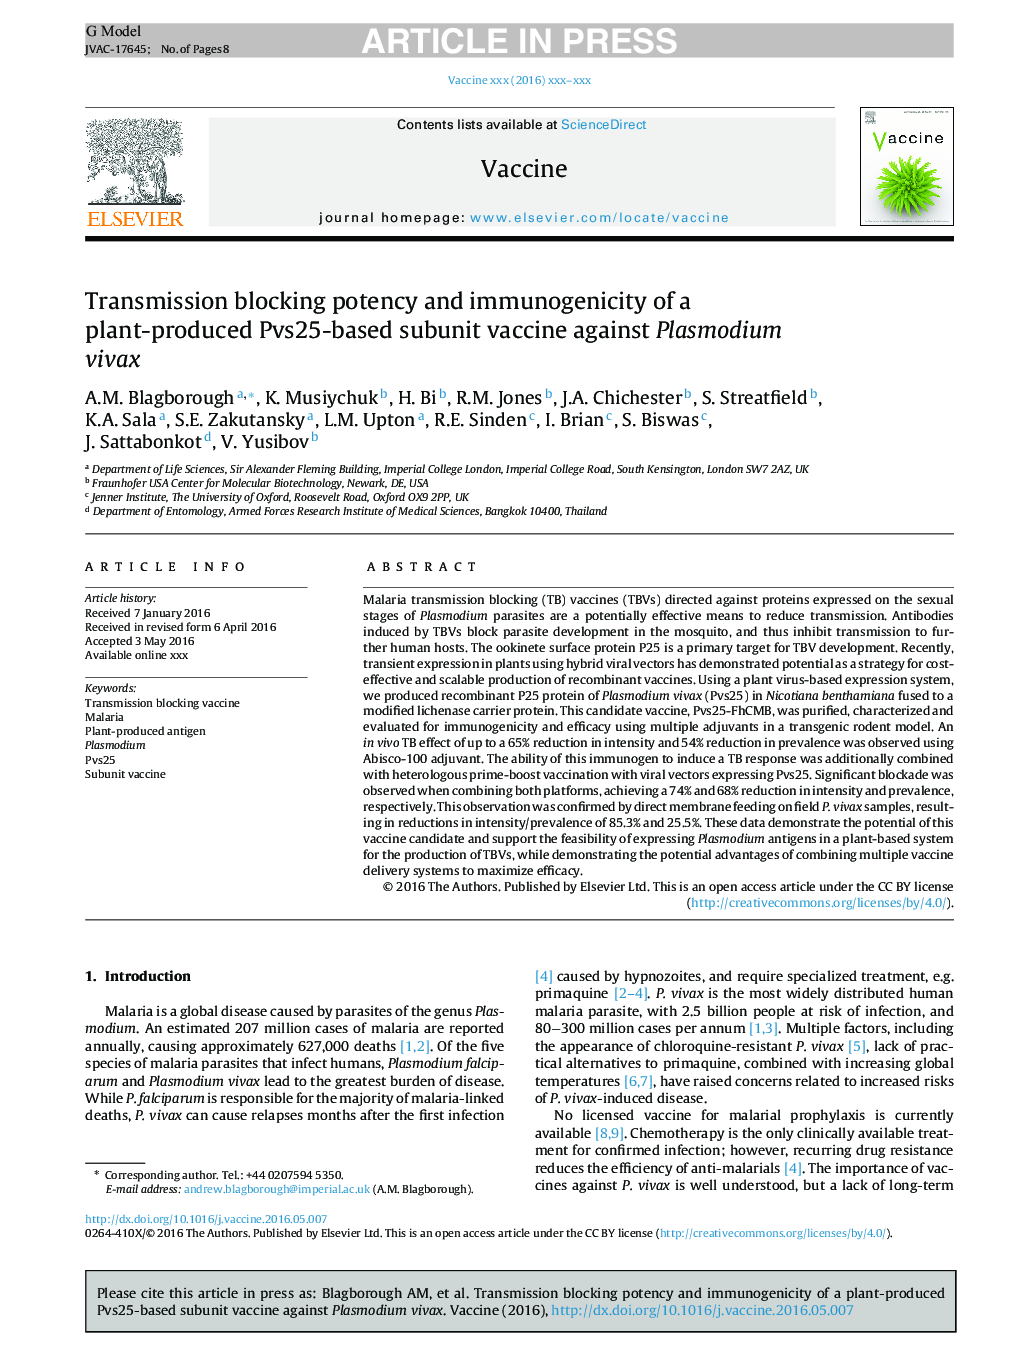 Transmission blocking potency and immunogenicity of a plant-produced Pvs25-based subunit vaccine against Plasmodium vivax